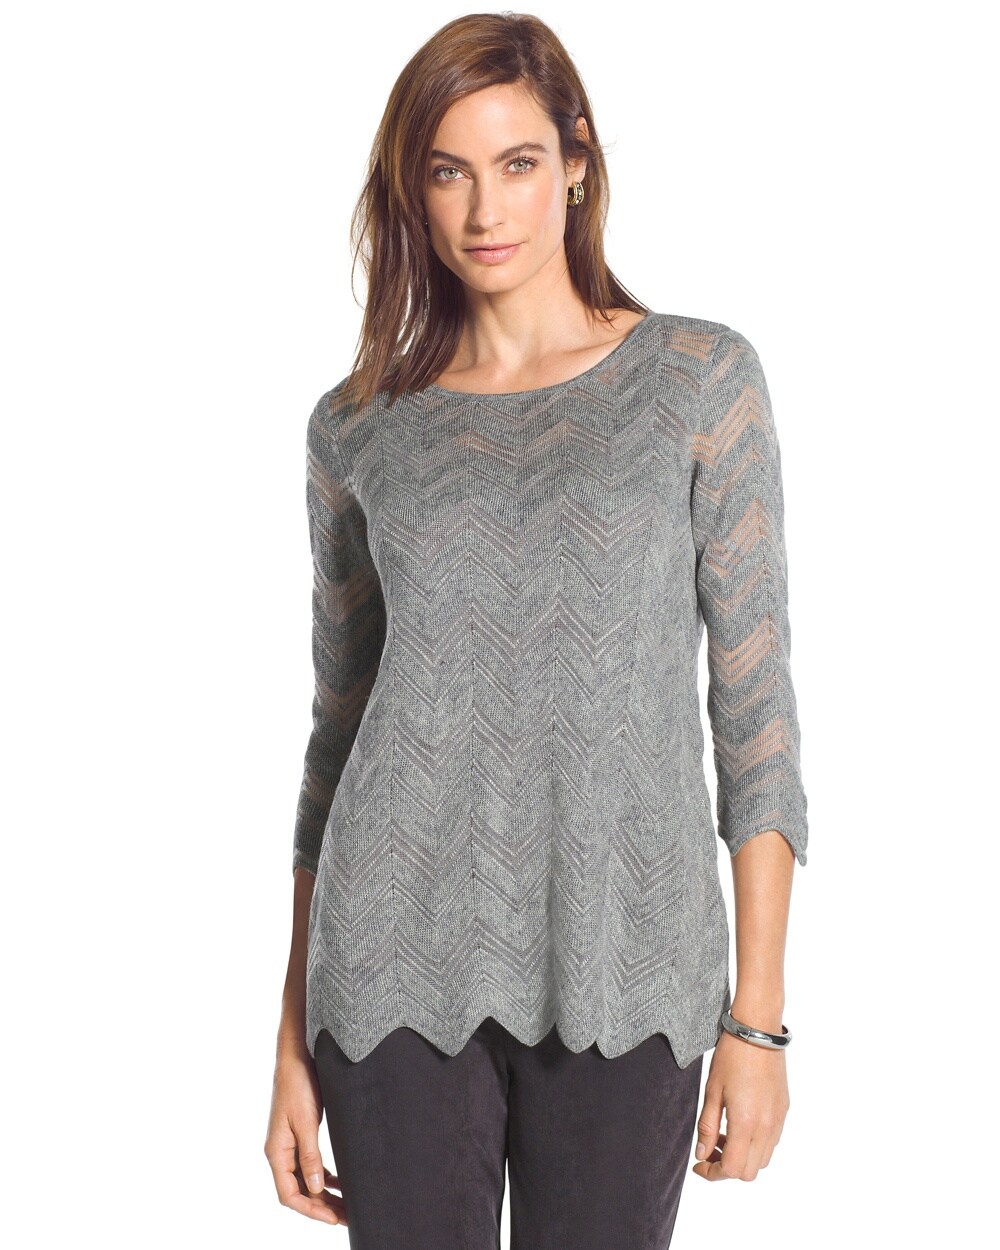 Travelers Collection Chevron Gray Sweater